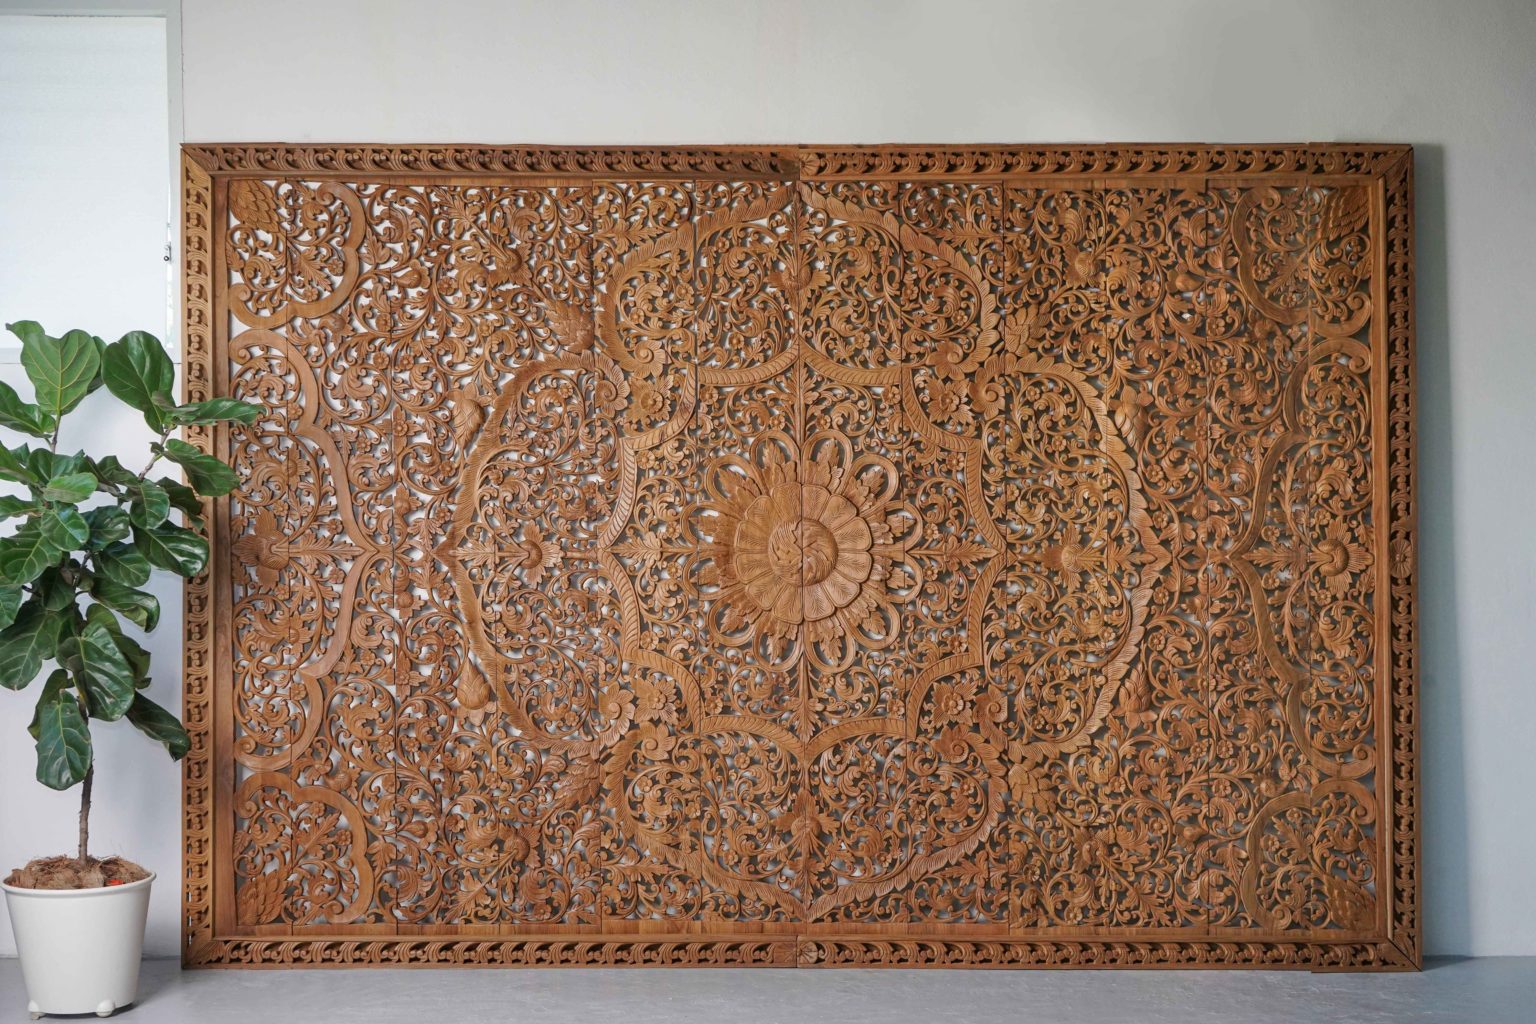 Ceiling Mounted Wall Art Panels Hand Carved in Reclaimed Teak Wood